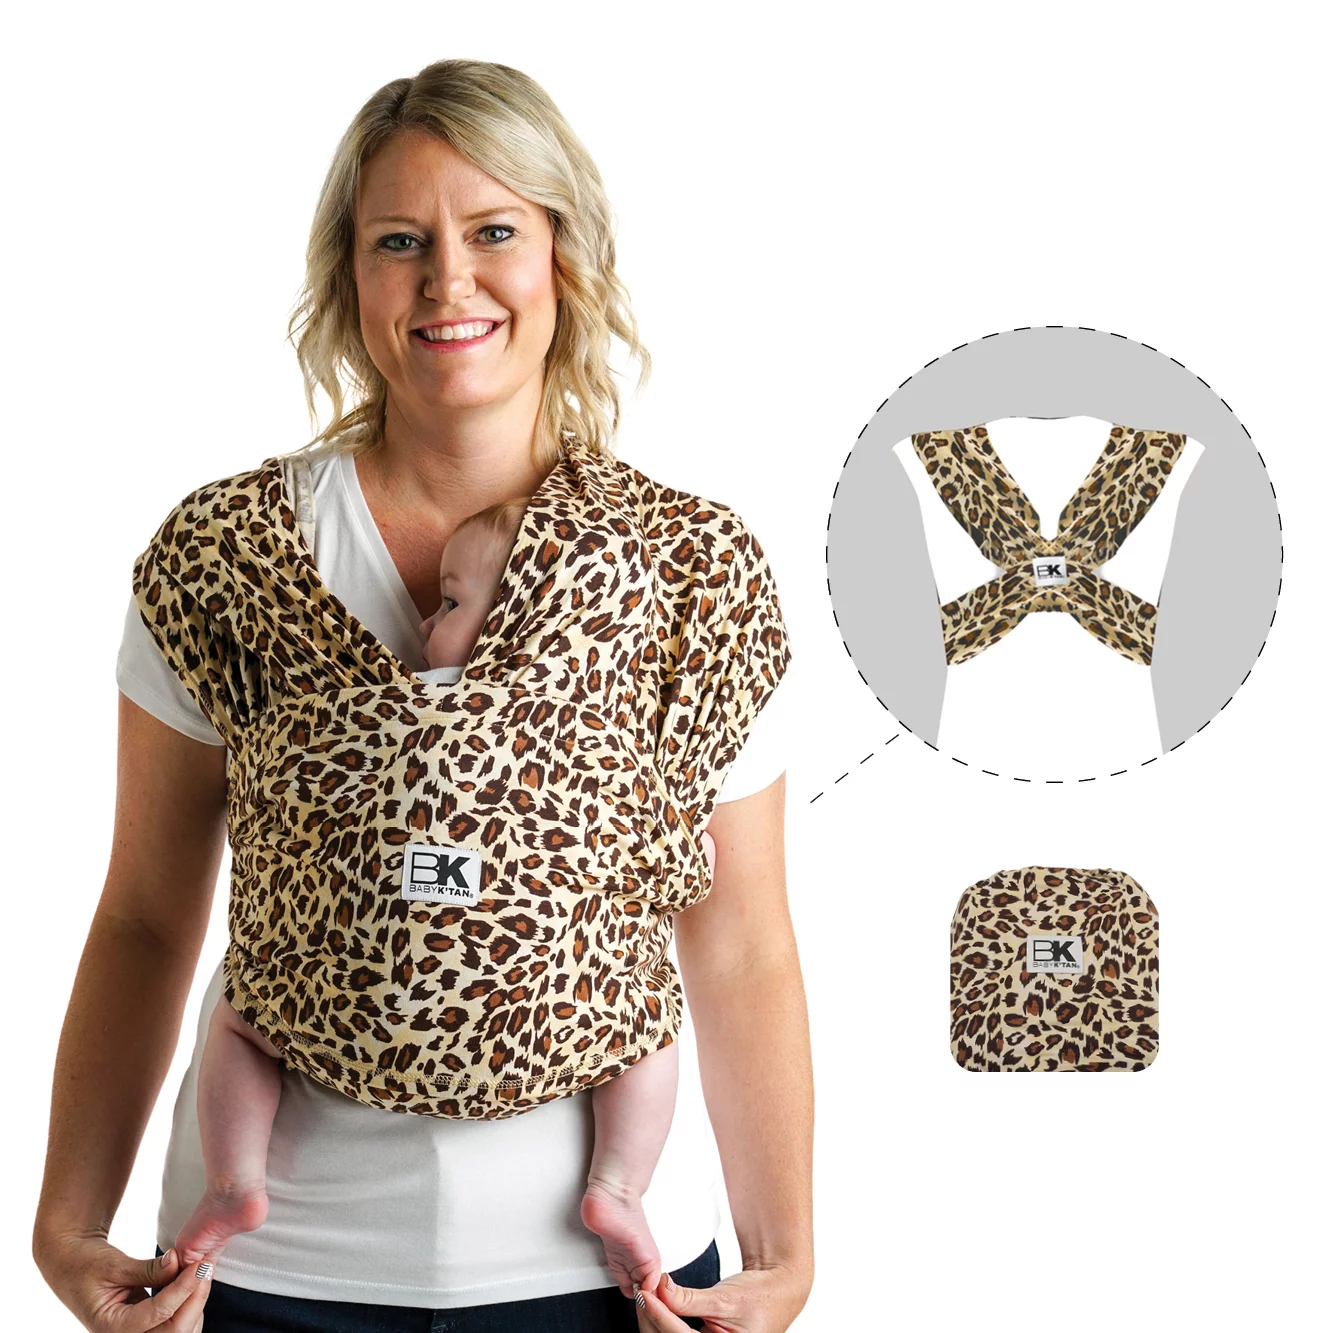 Baby K’tan Print Baby Wrap Carrier, Infant and Child Sling - Pre-Wrapped Holder for Babywearing - No Tying or Rings - Carry Newborn up to 35 lbs, Leopard Love (Small)